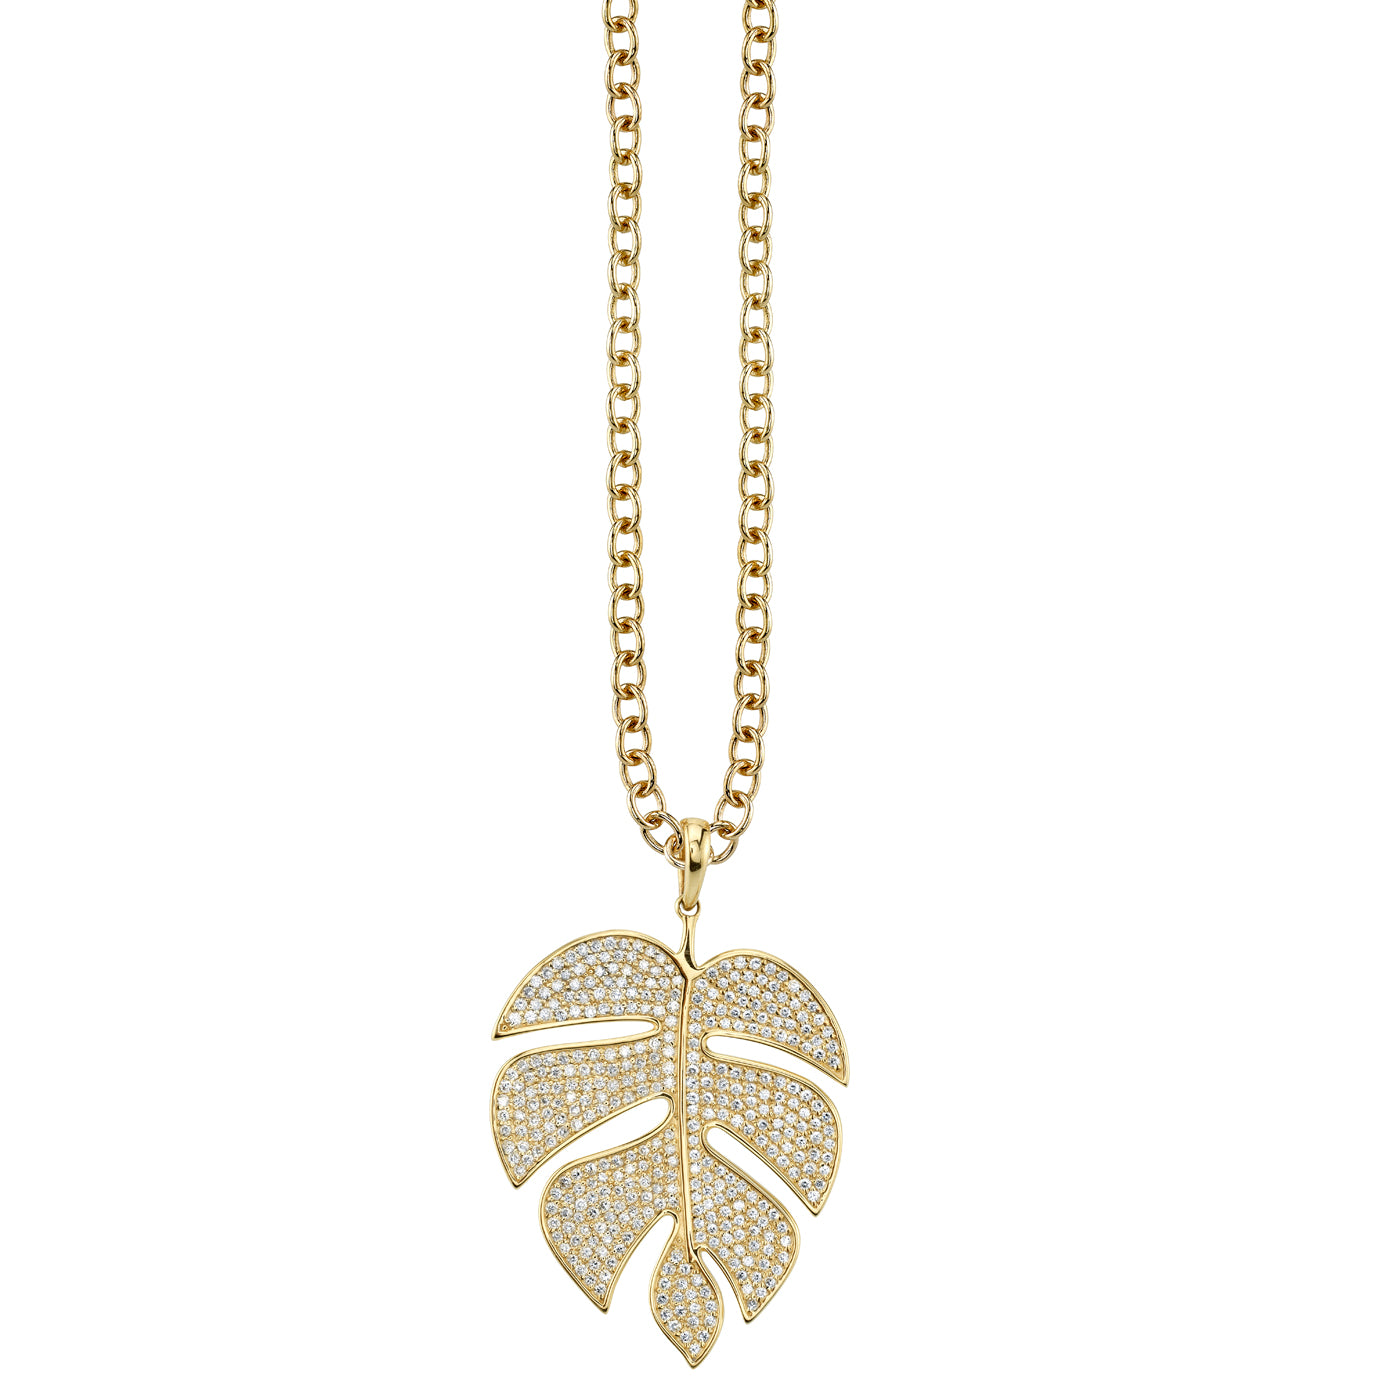 Dainty Gold Monstera Leaf Charms Pendant, 21mm Long Leaf Charm, Diamond Gold Charms, Textured Gold Necklace Charm, Gold Charms for Bracelet 18K Solid